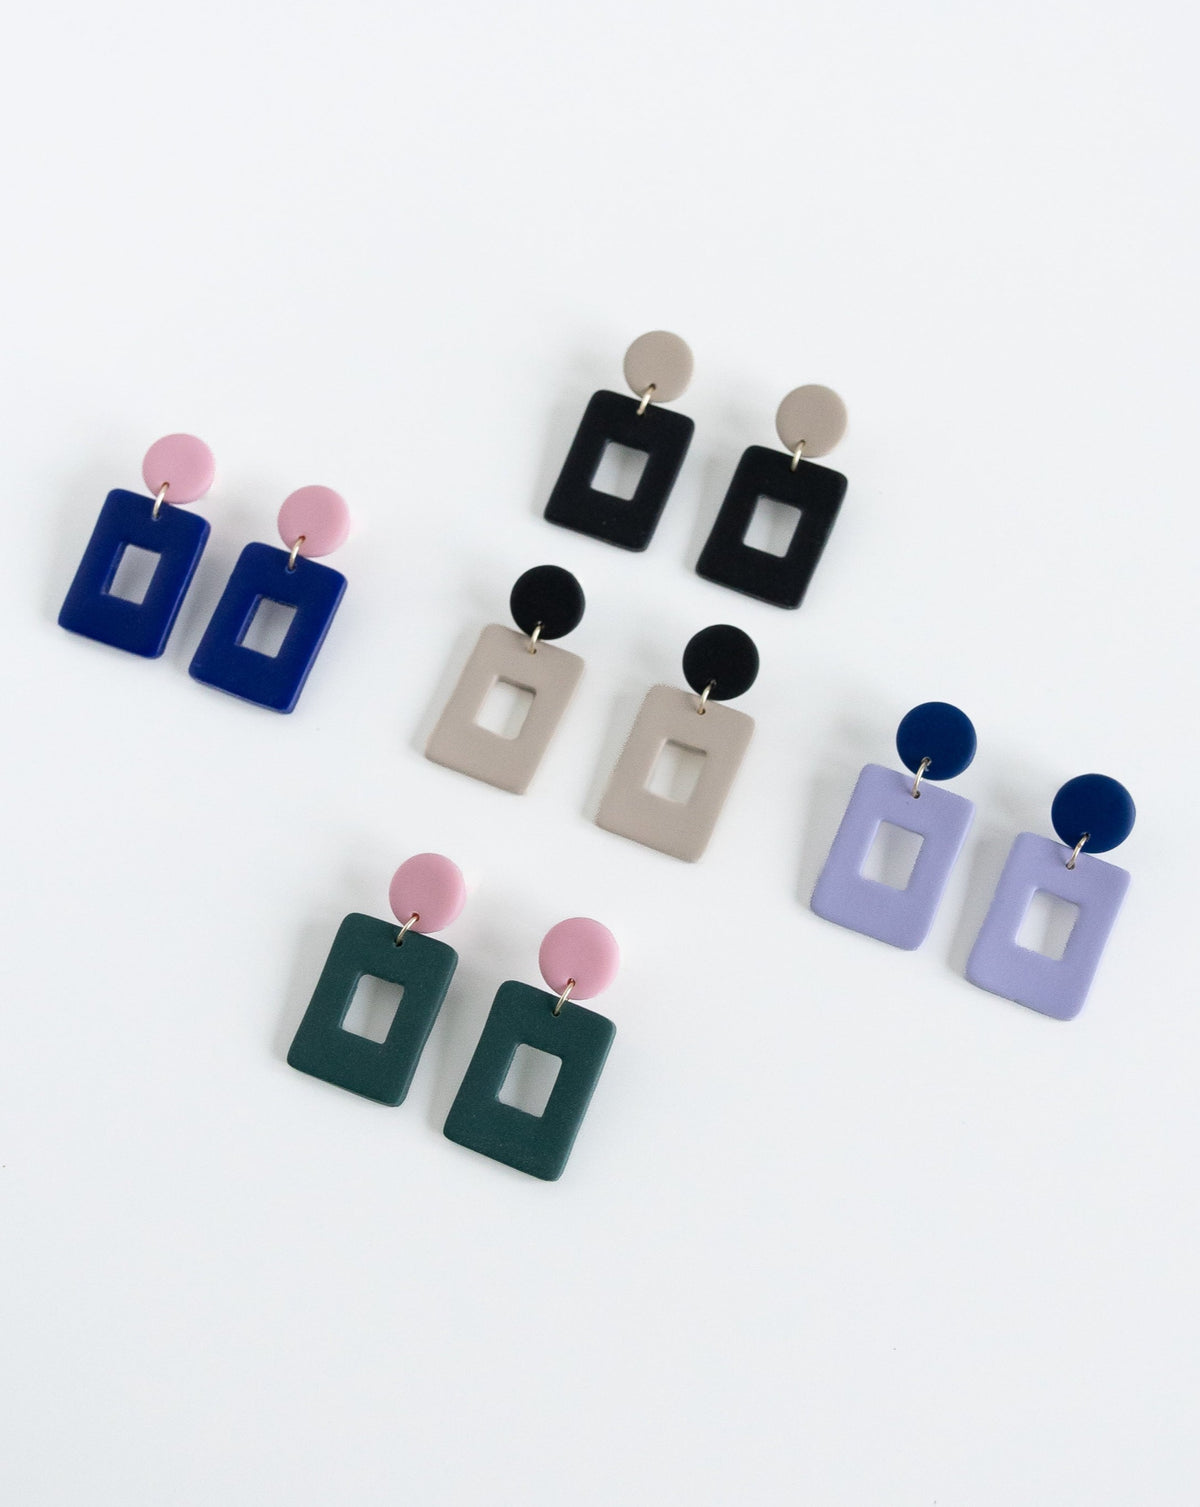 The collection of Muna earrings in different color of Hue Blue, Beige, Black, Pine and Lilac.